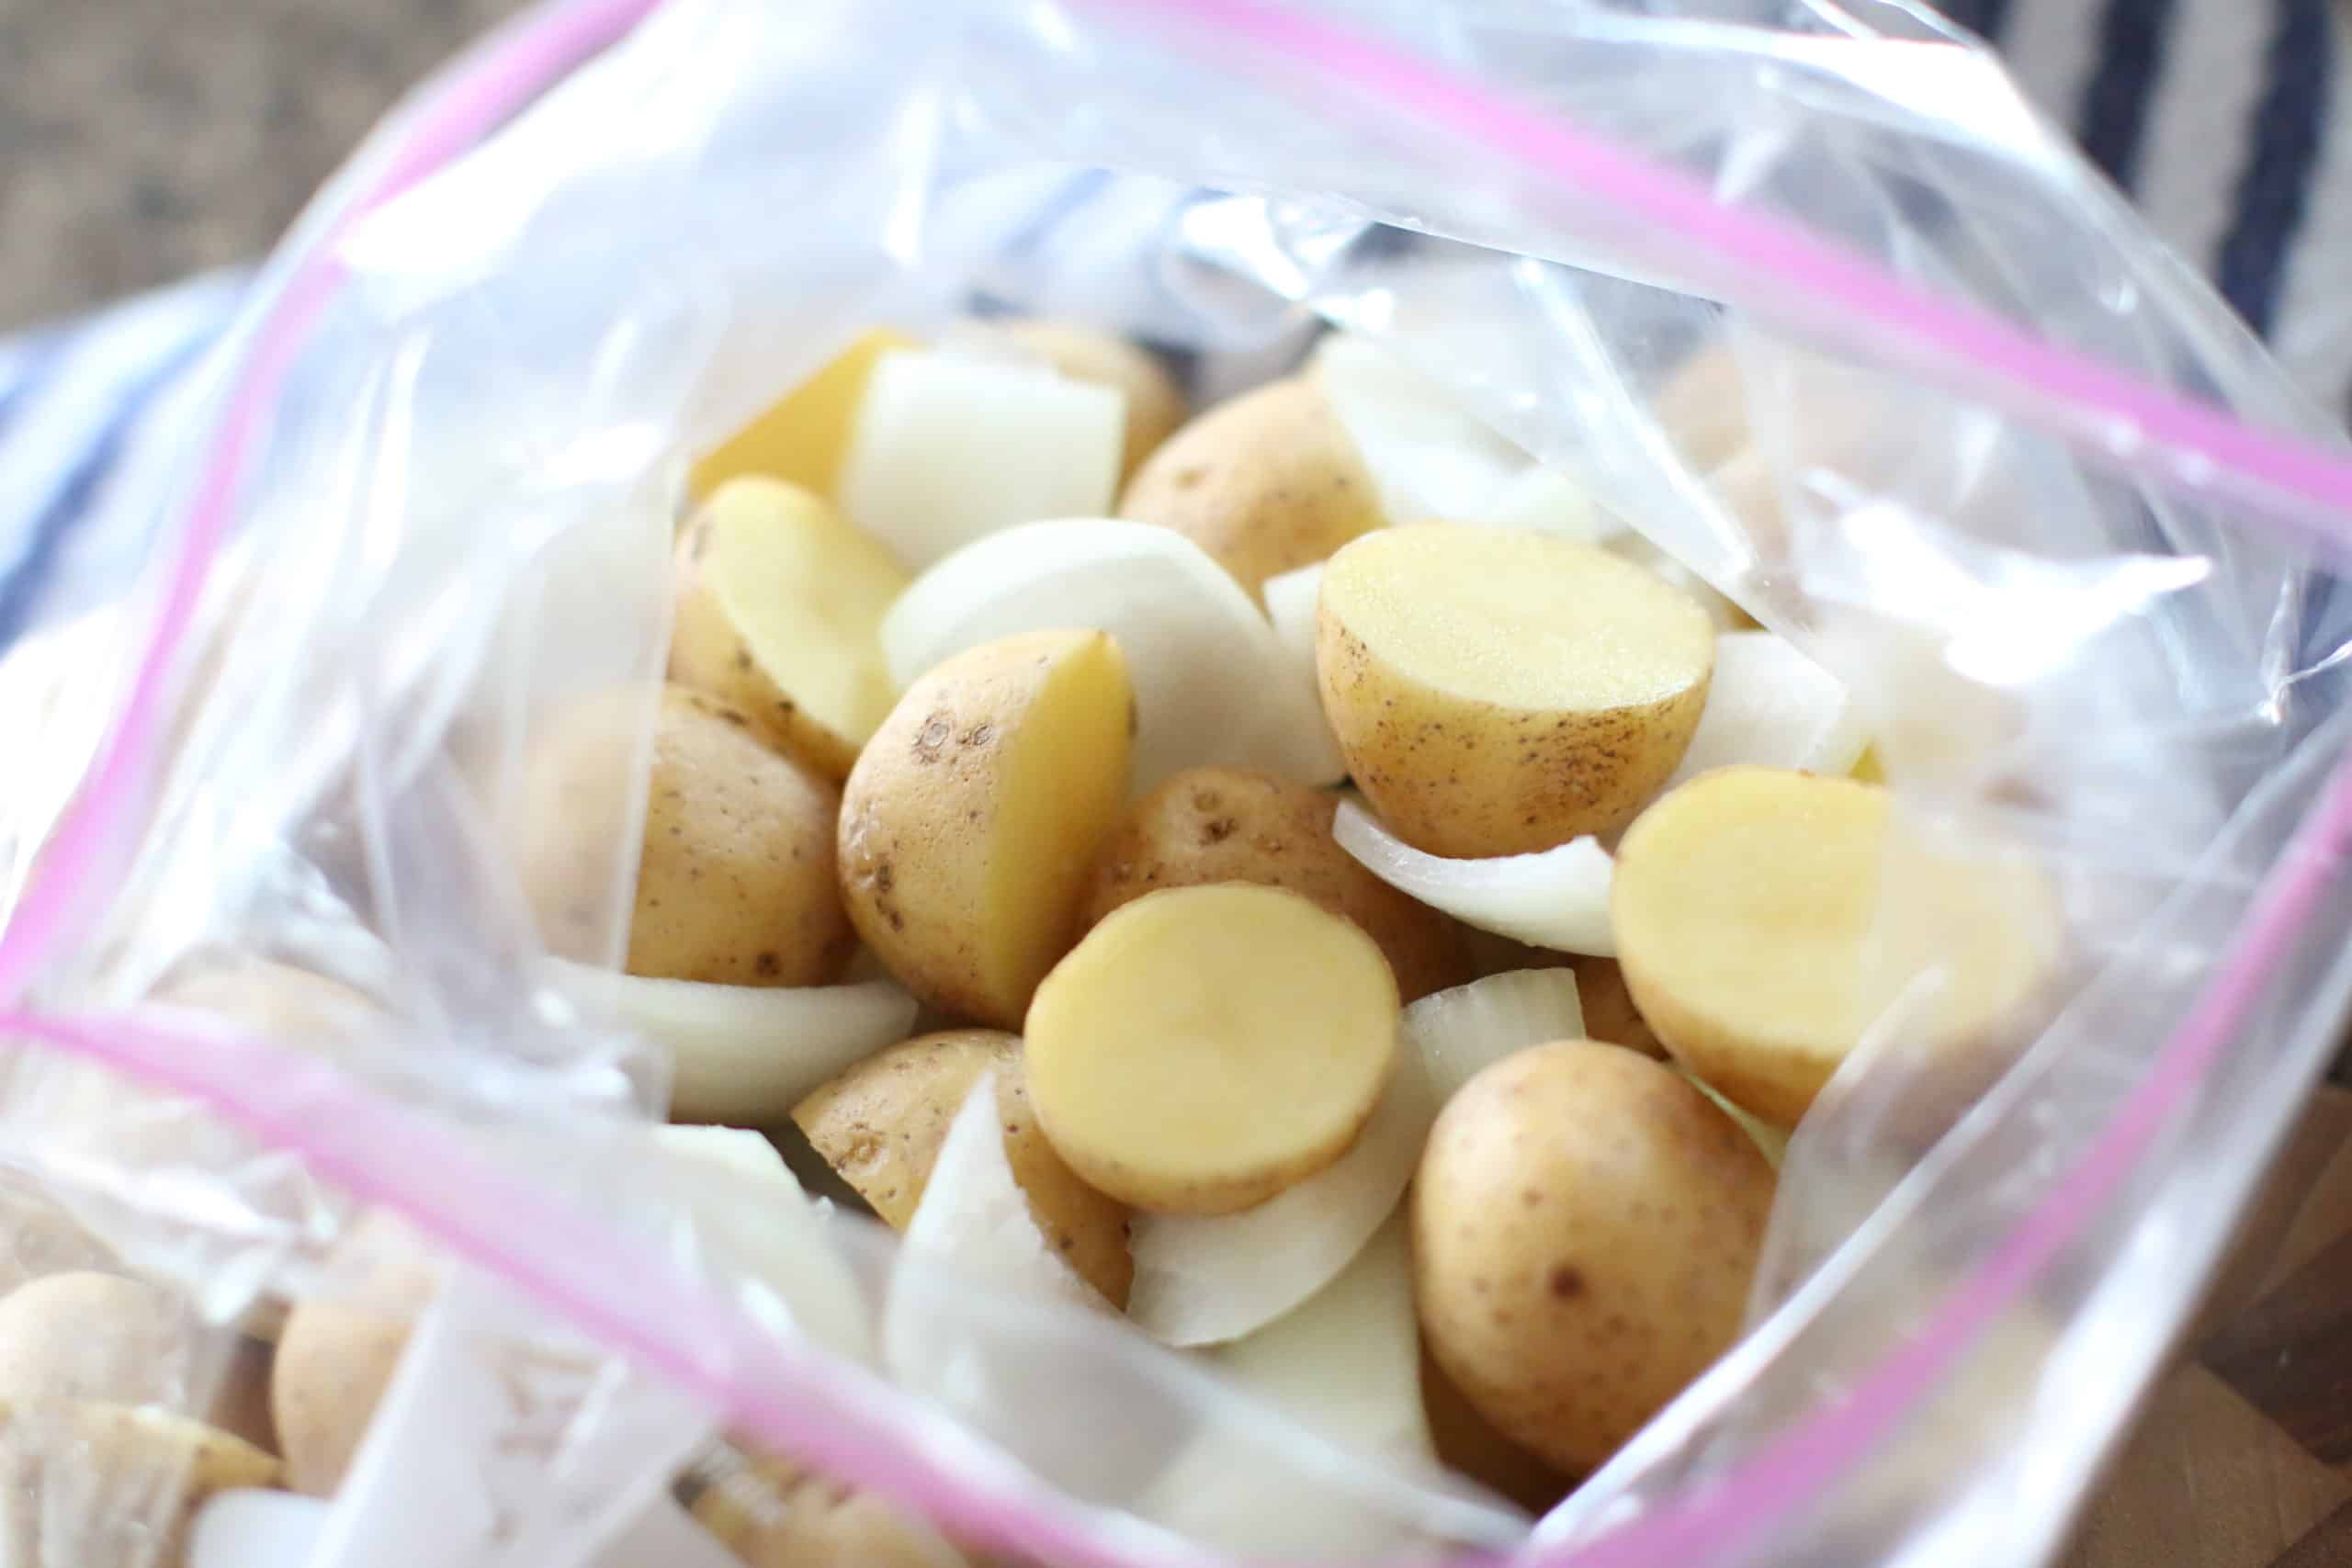 sliced potatoes and diced onion in a gallon-sized Ziploc bag.